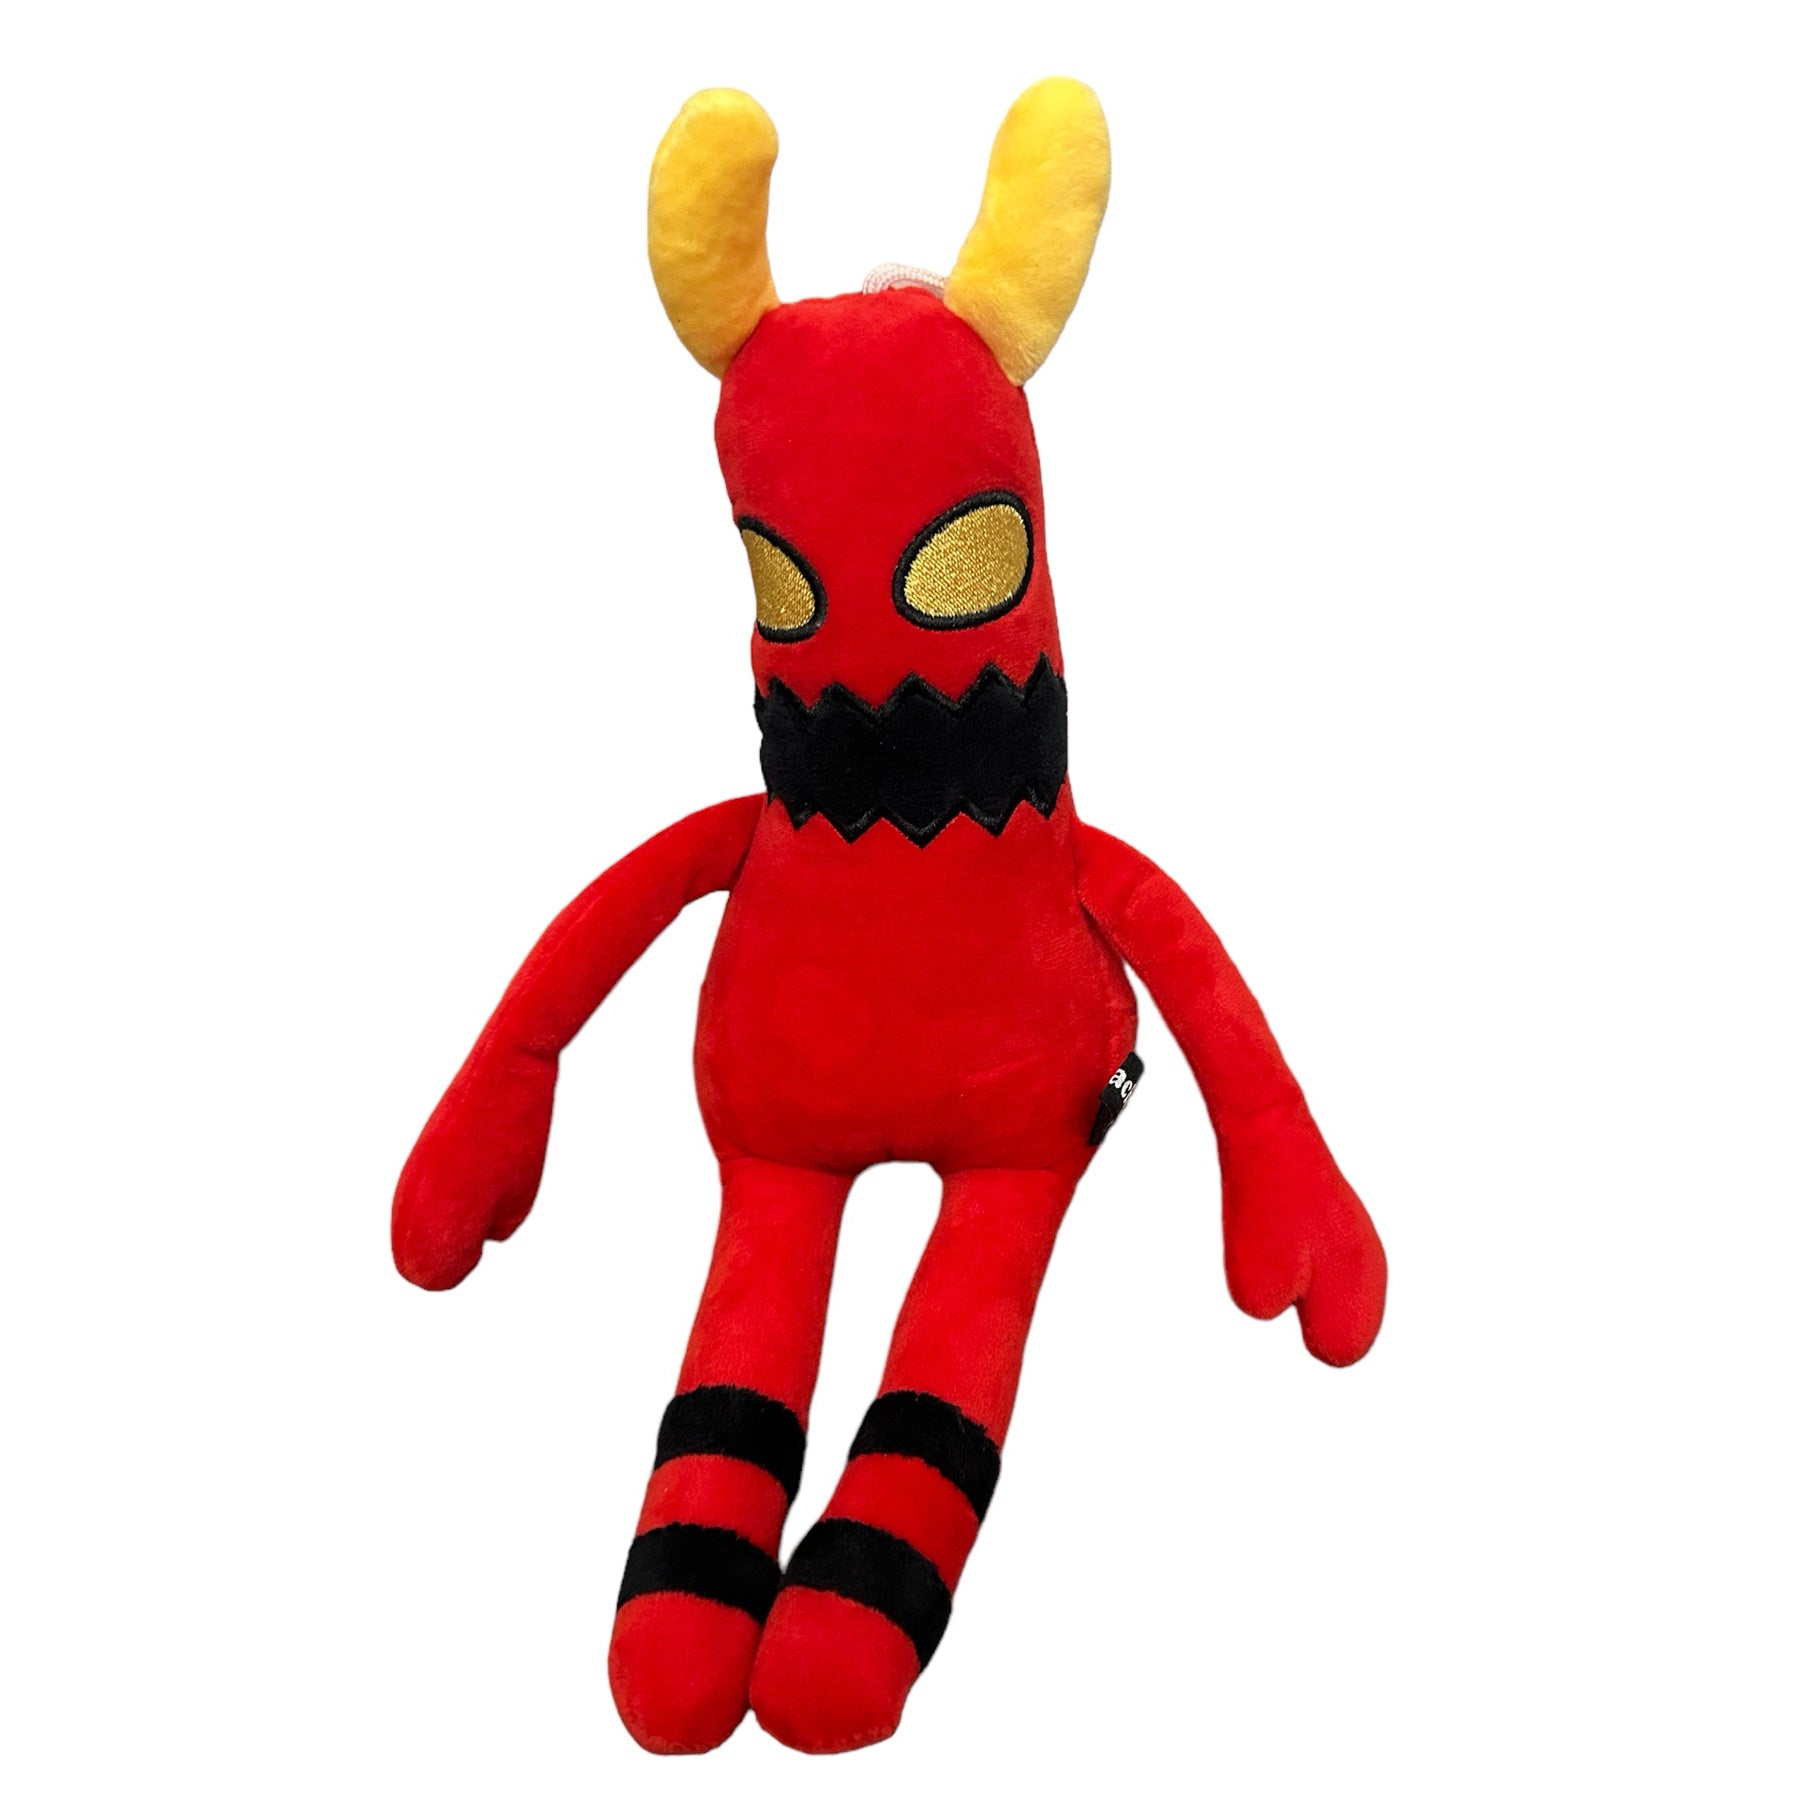 Toy Machine Japan Monster Doll Red - Small